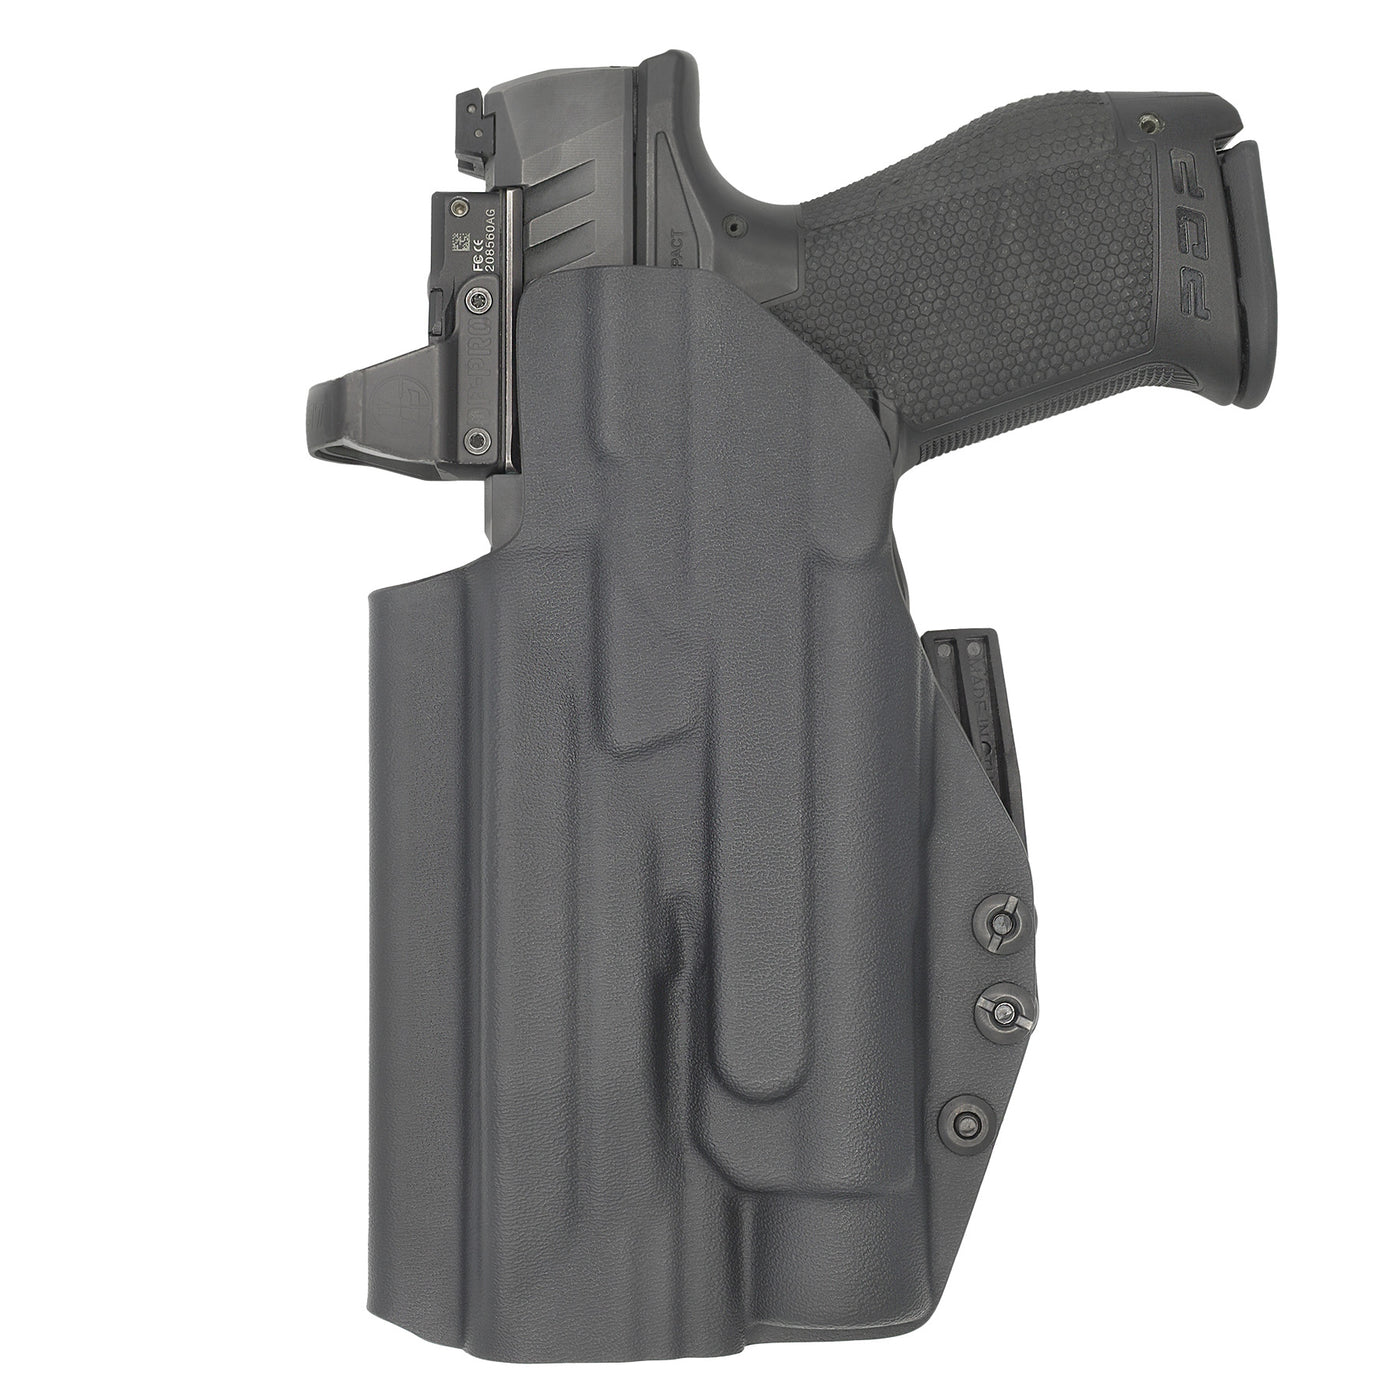 C&G Holsters custom IWB Tactical ALPHA UPGRADE CZ P07/9 TLR1 in holstered position back view